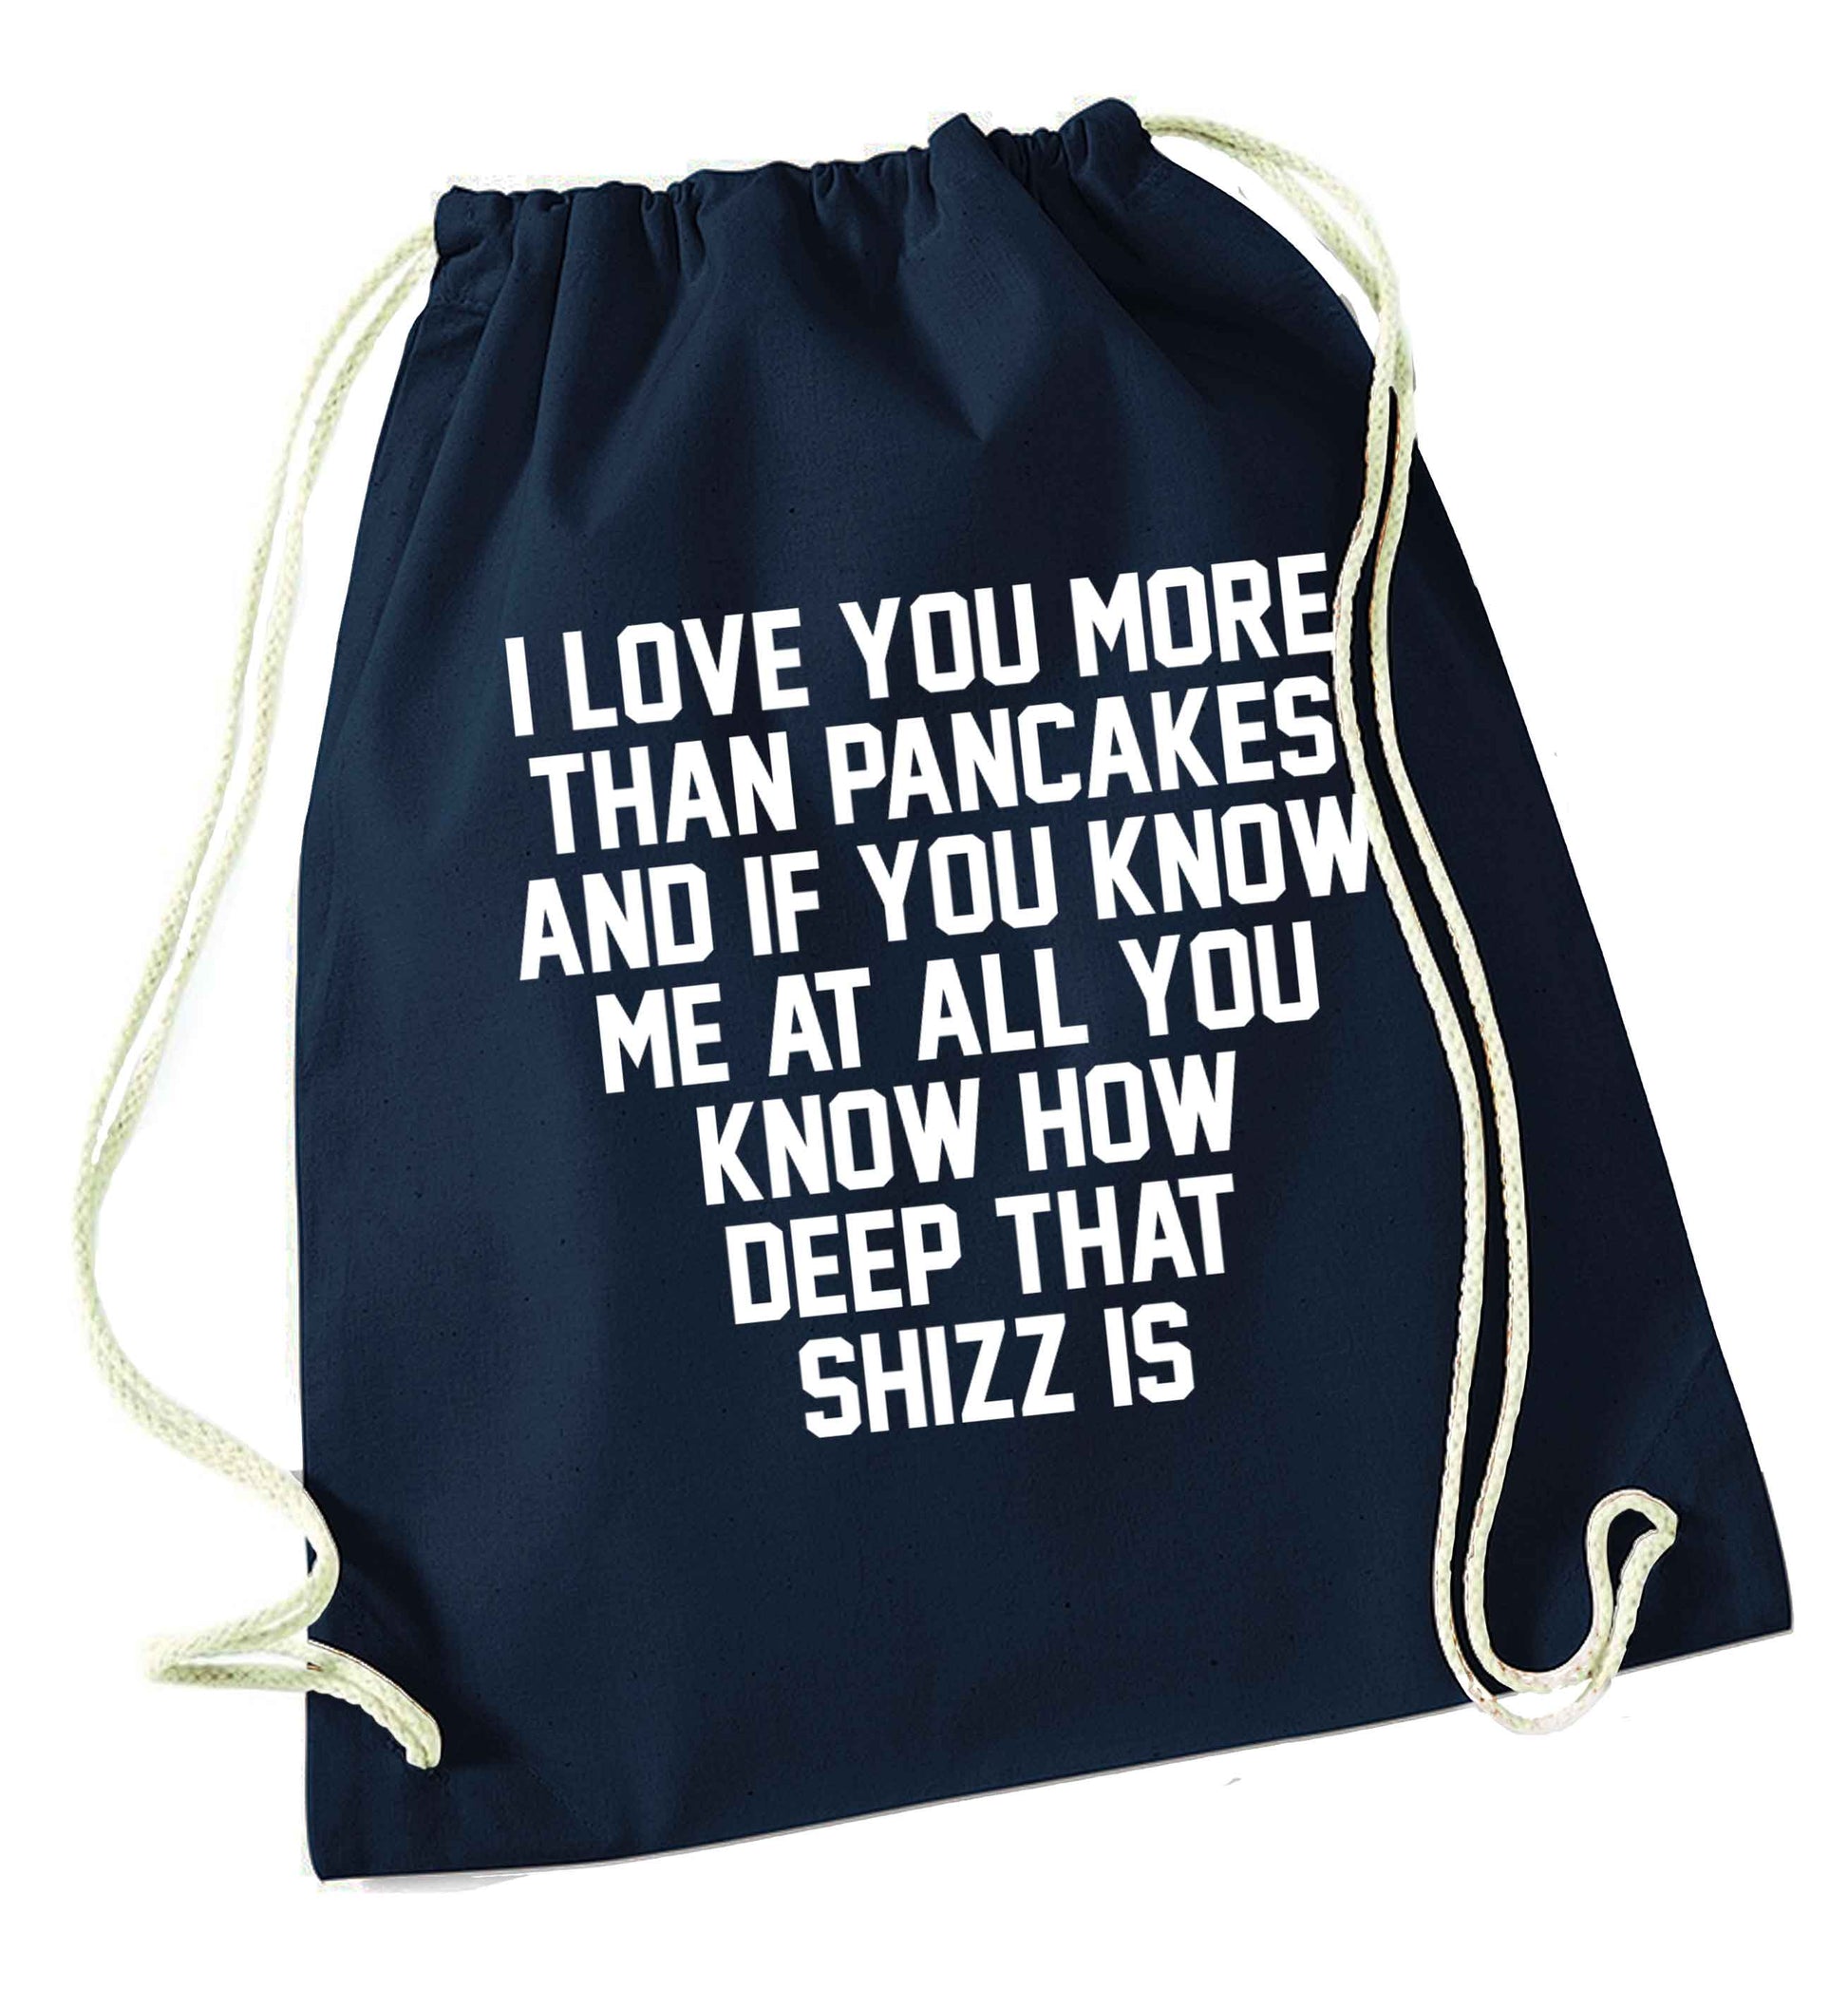 I love you more than pancakes and if you know me at all you know how deep that shizz is navy drawstring bag